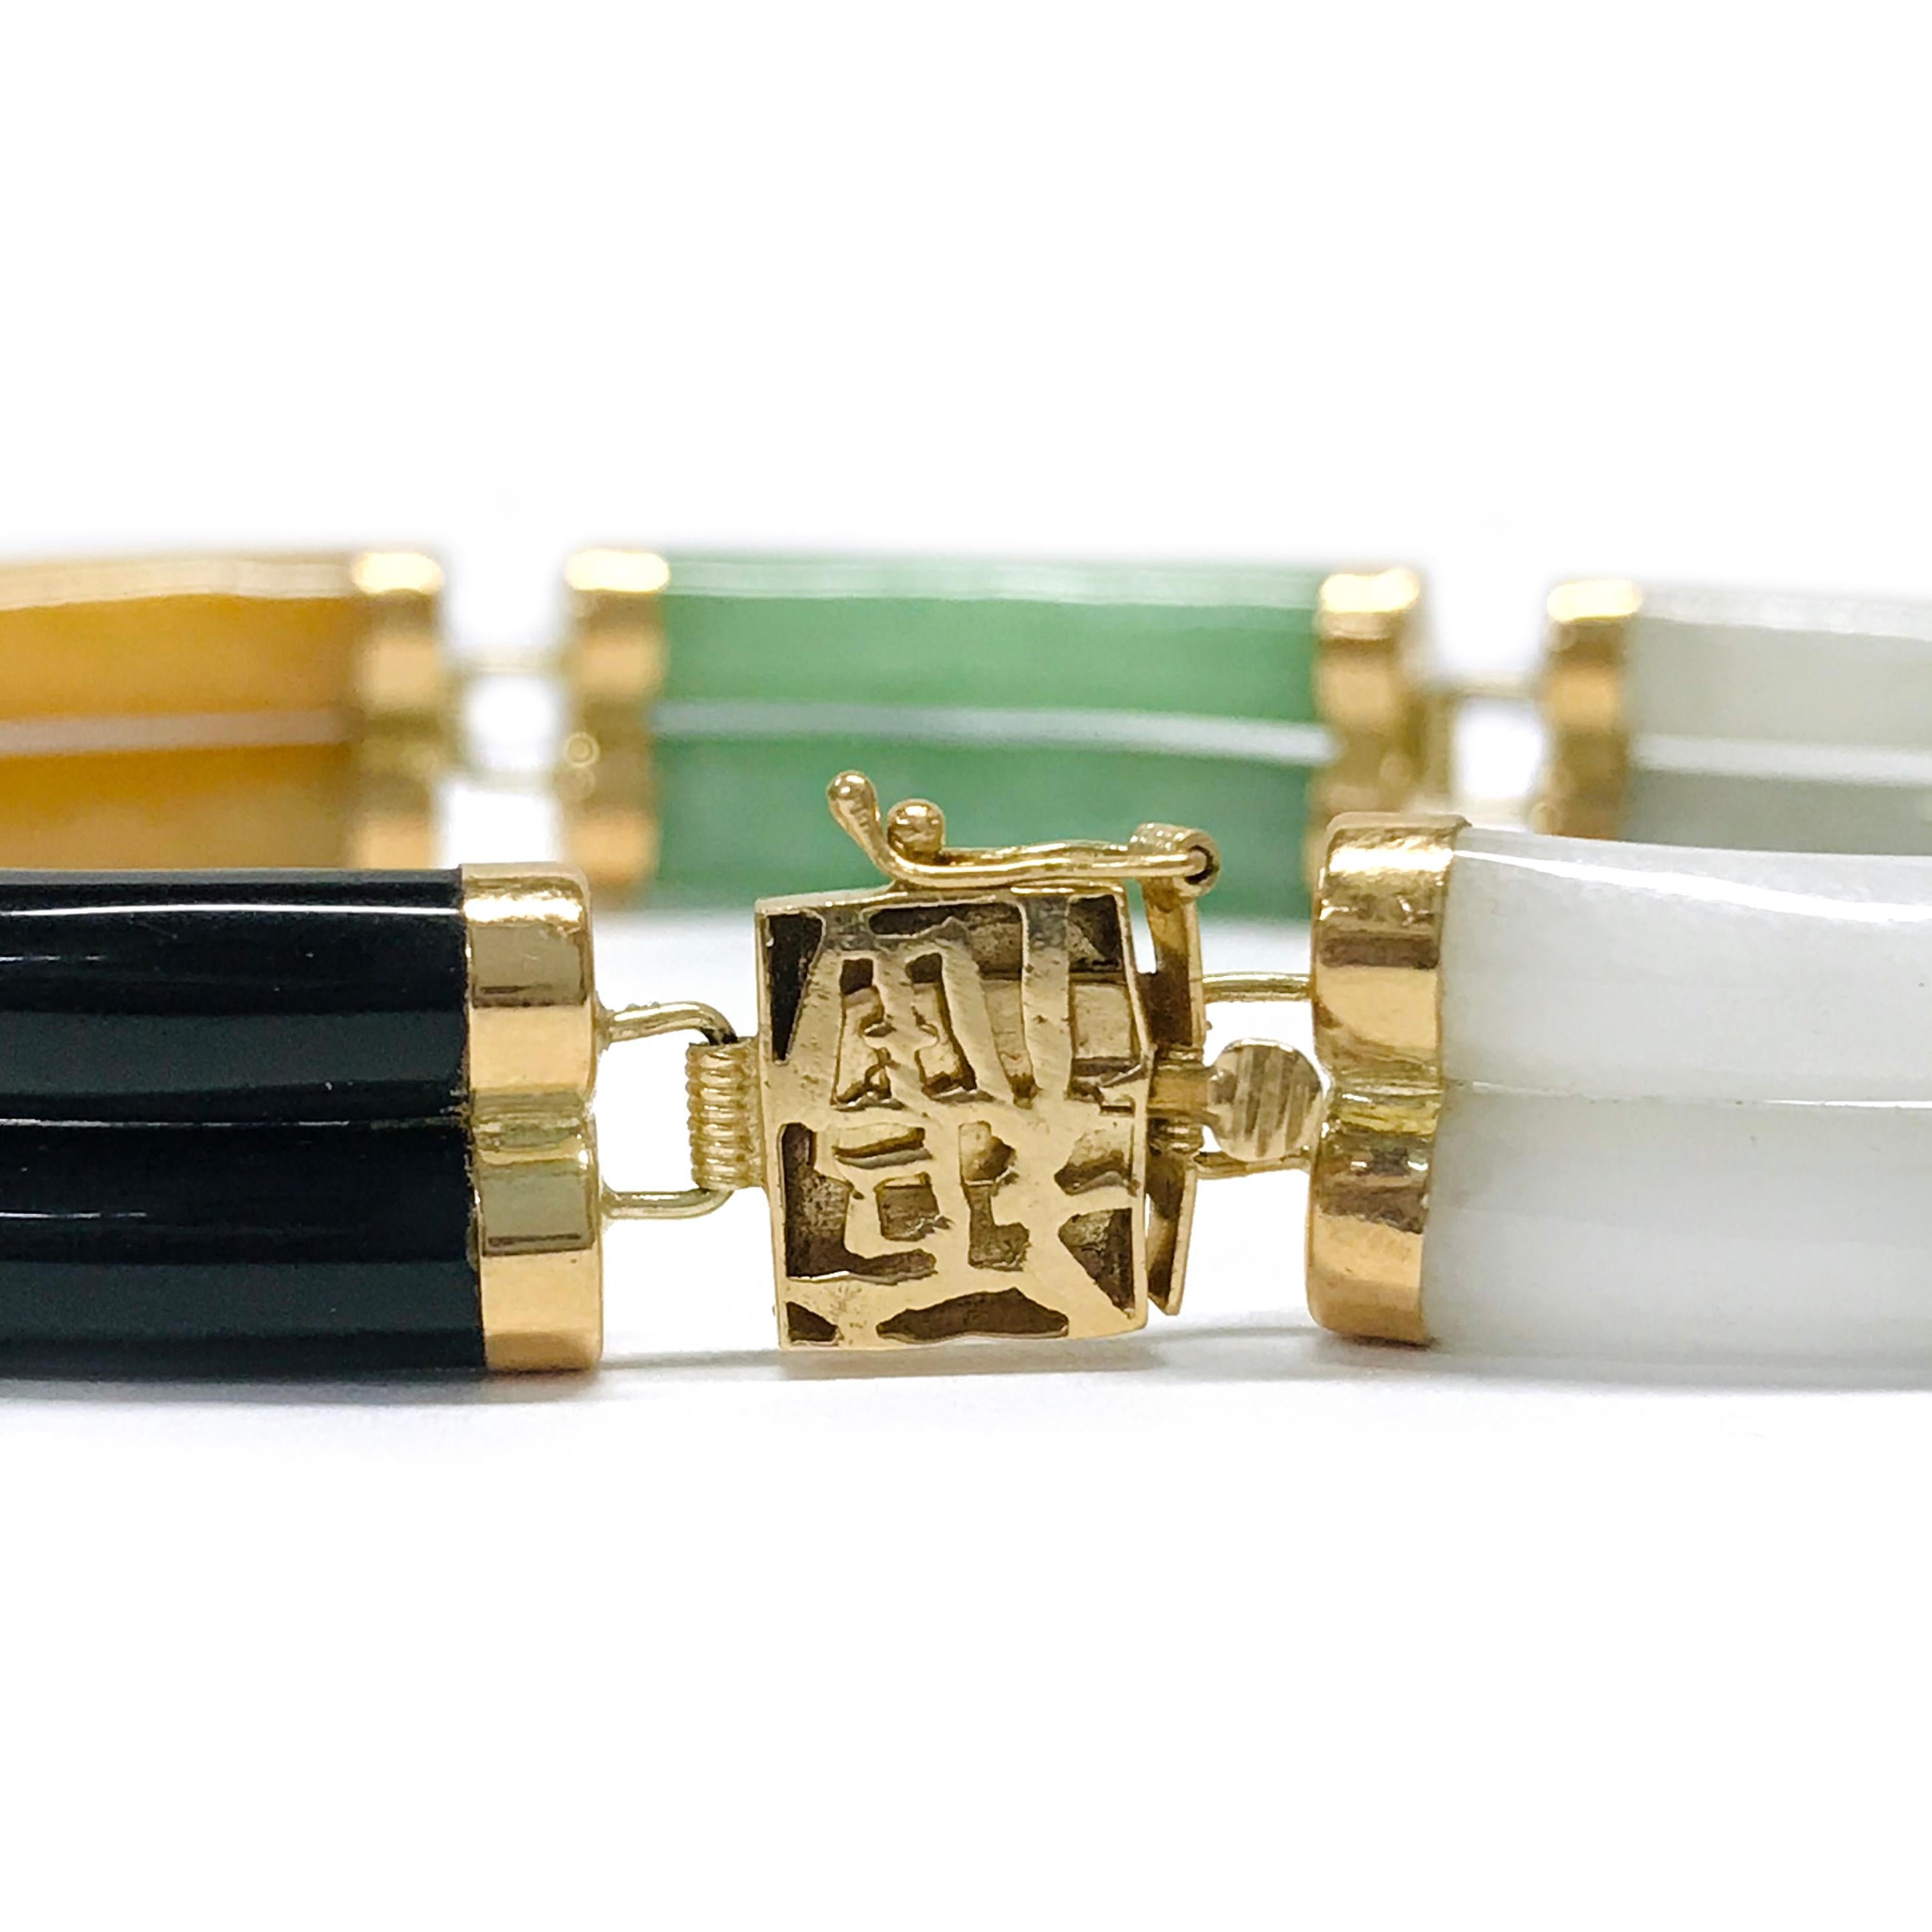 Beautiful double link Jade station bracelet in 14k gold. The bracelet features double links of white, red, green, yellow, light green, and black Jade for a total of fourteen links, each capped in 14k gold and linked with a hinge. The links are